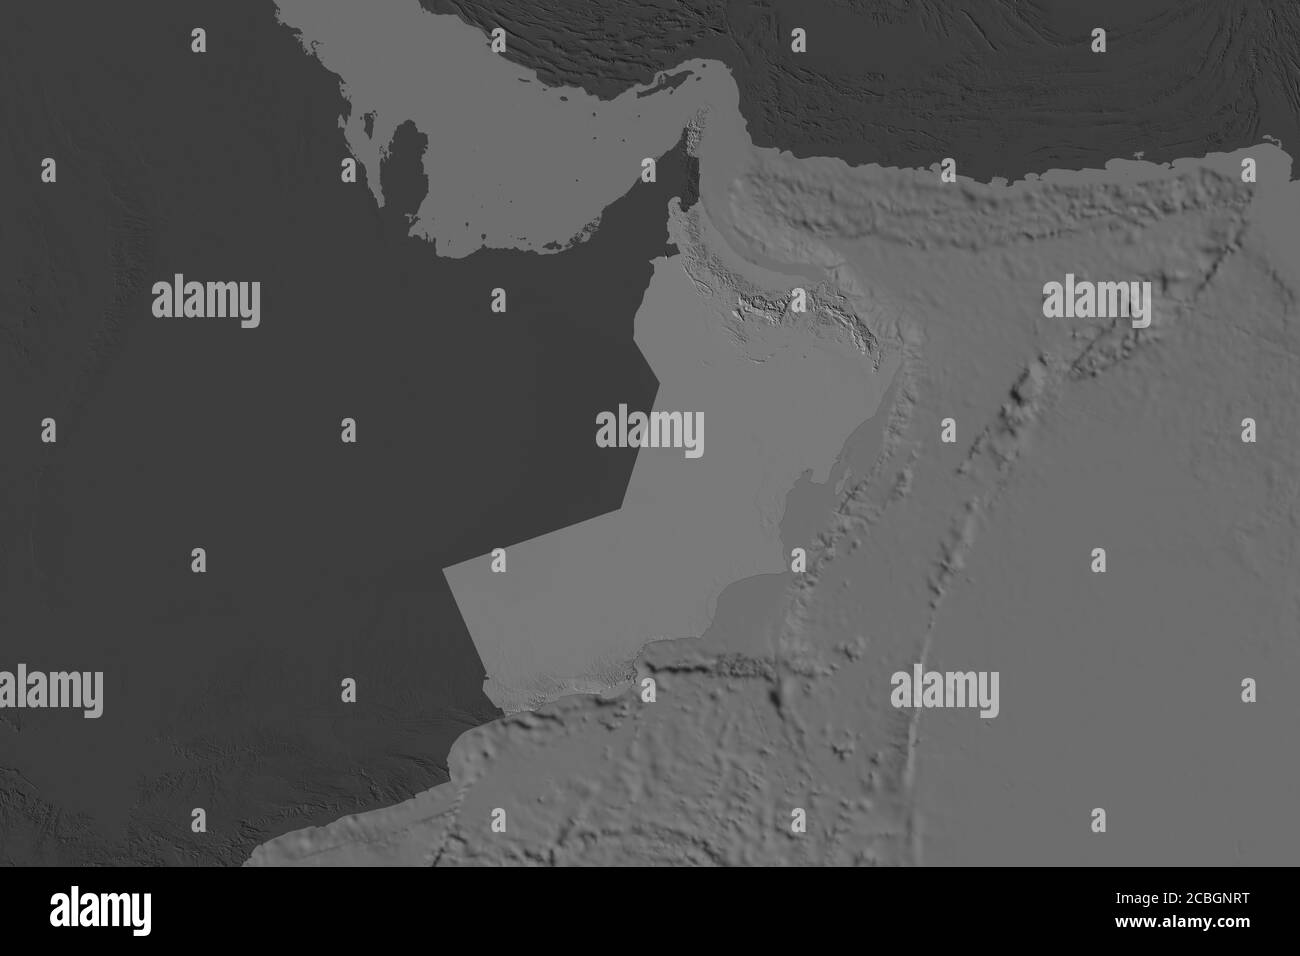 Shape of Oman separated by the desaturation of neighboring areas. Bilevel elevation map. 3D rendering Stock Photo